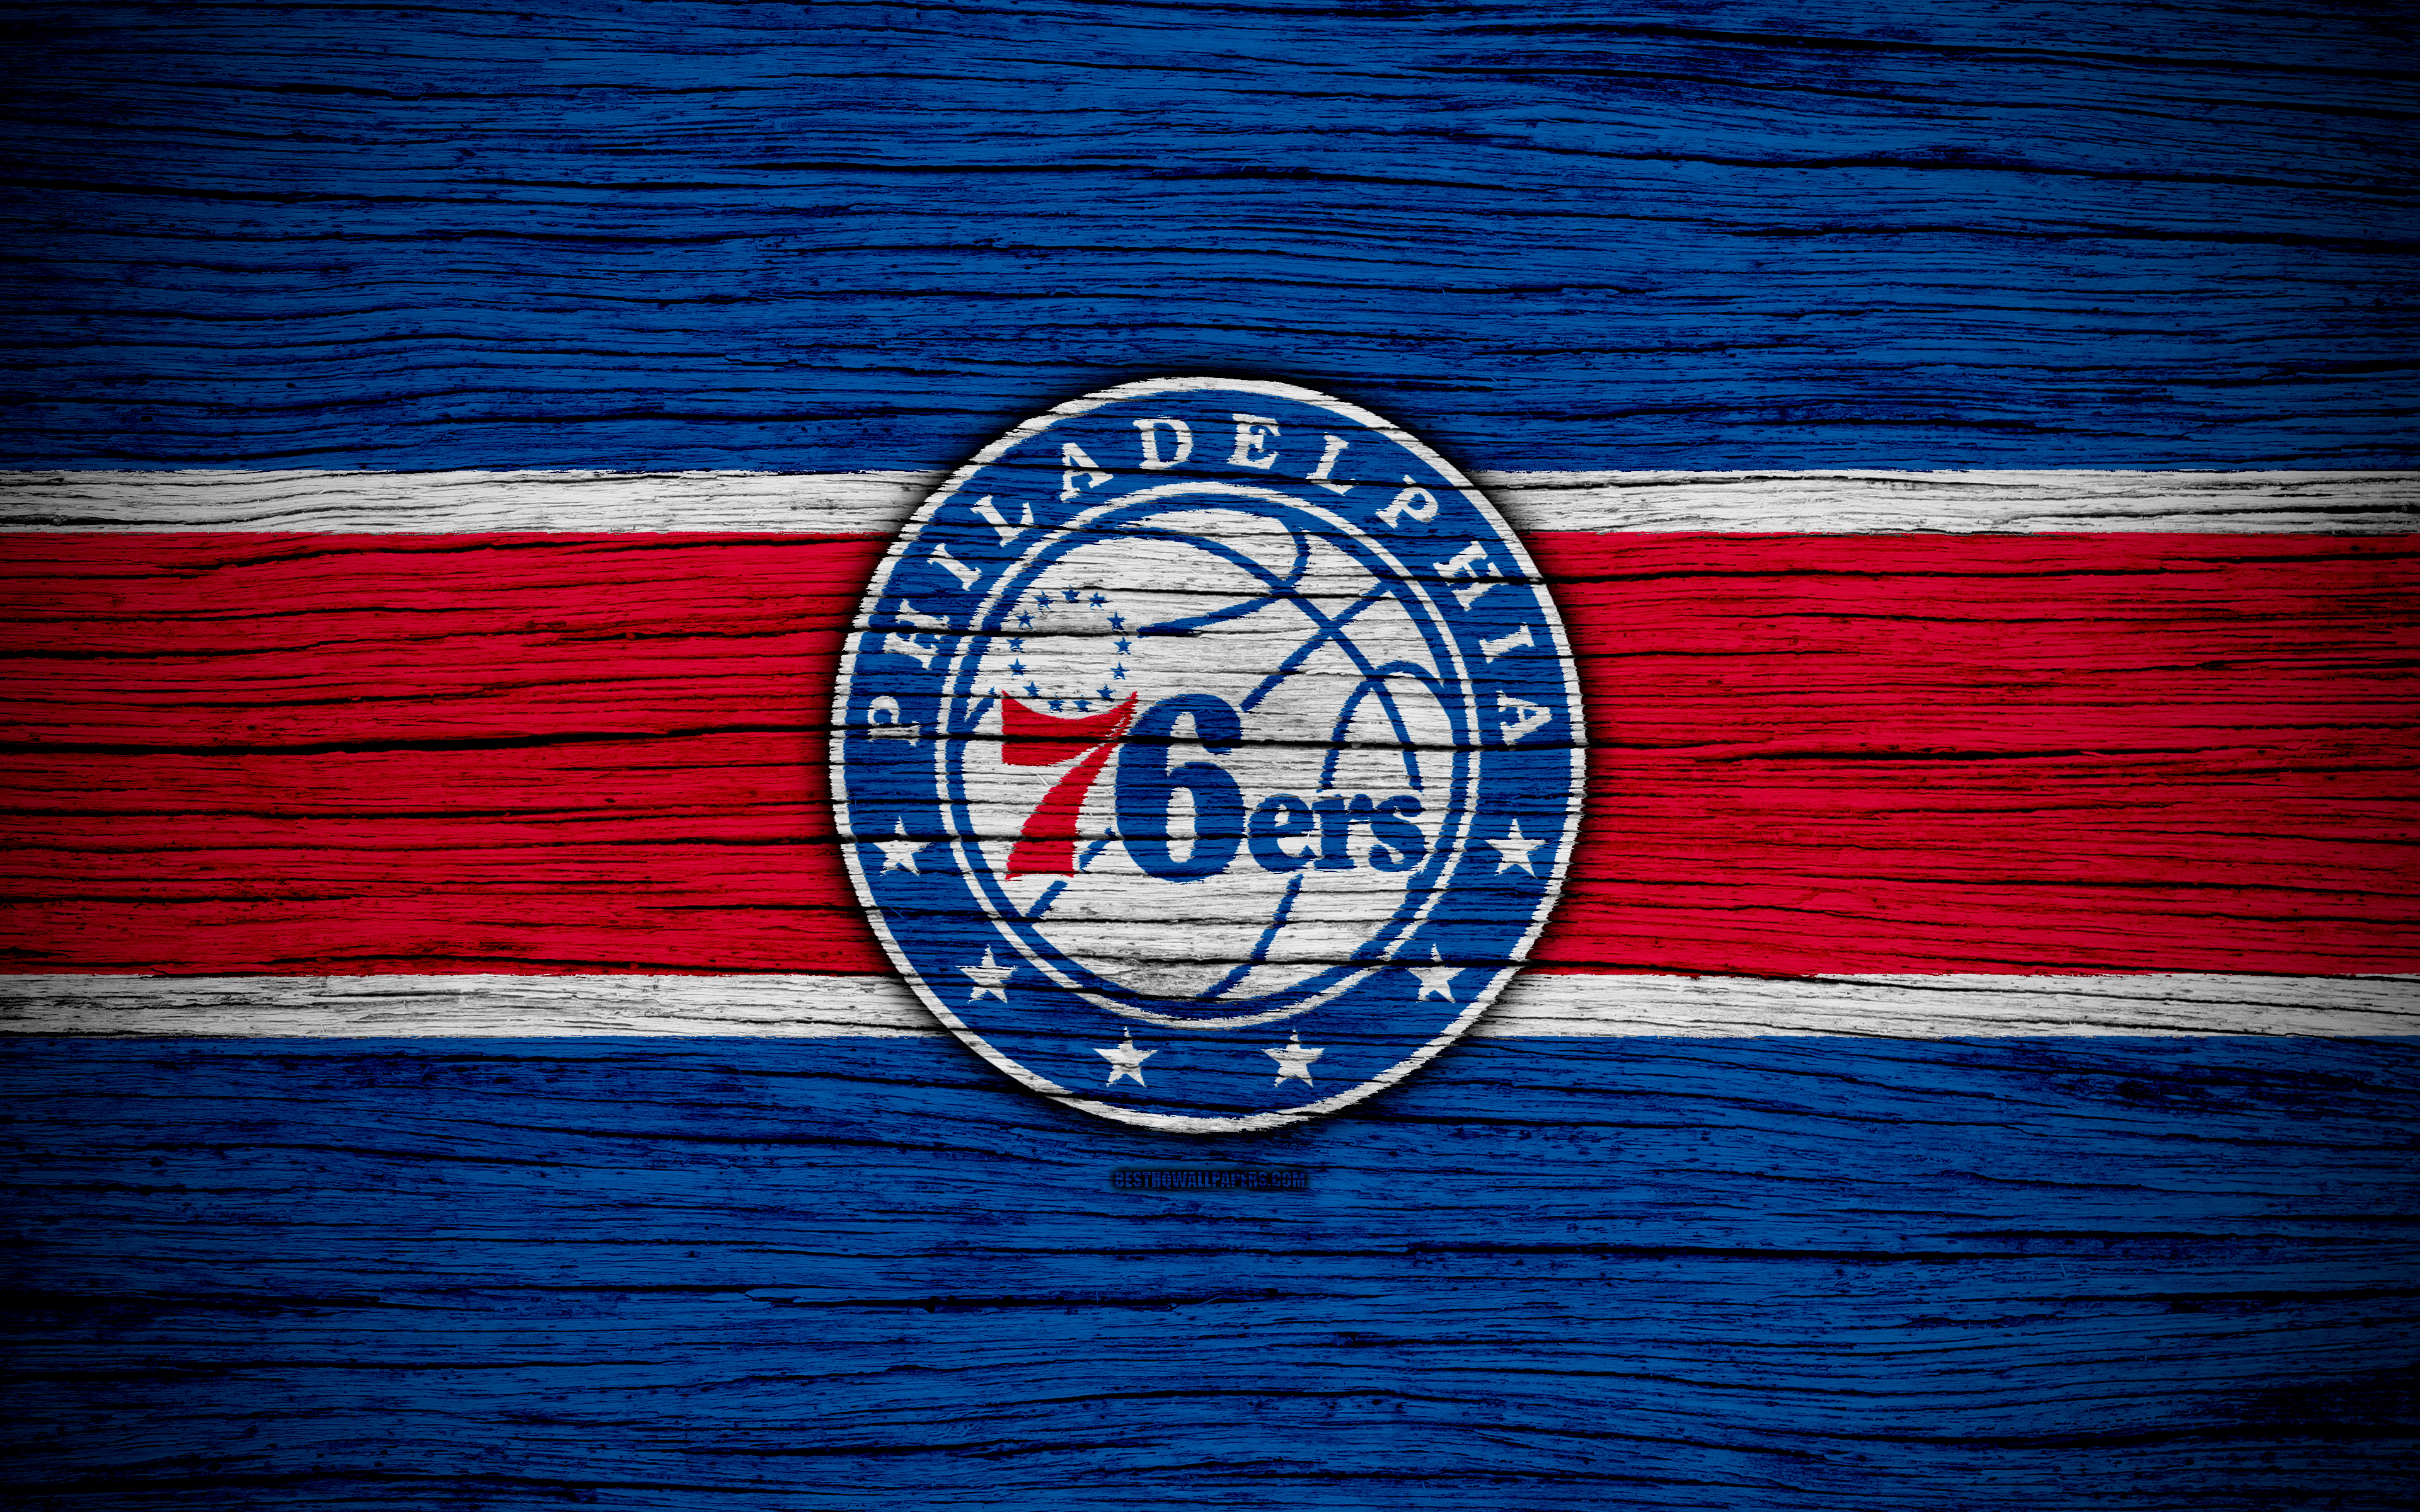 Download wallpaper 4k, Philadelphia 76ers, NBA, wooden texture, basketball, Eastern Conference, USA, emblem, basketball club, Philadelphia 76ers logo for desktop with resolution 3840x2400. High Quality HD picture wallpaper